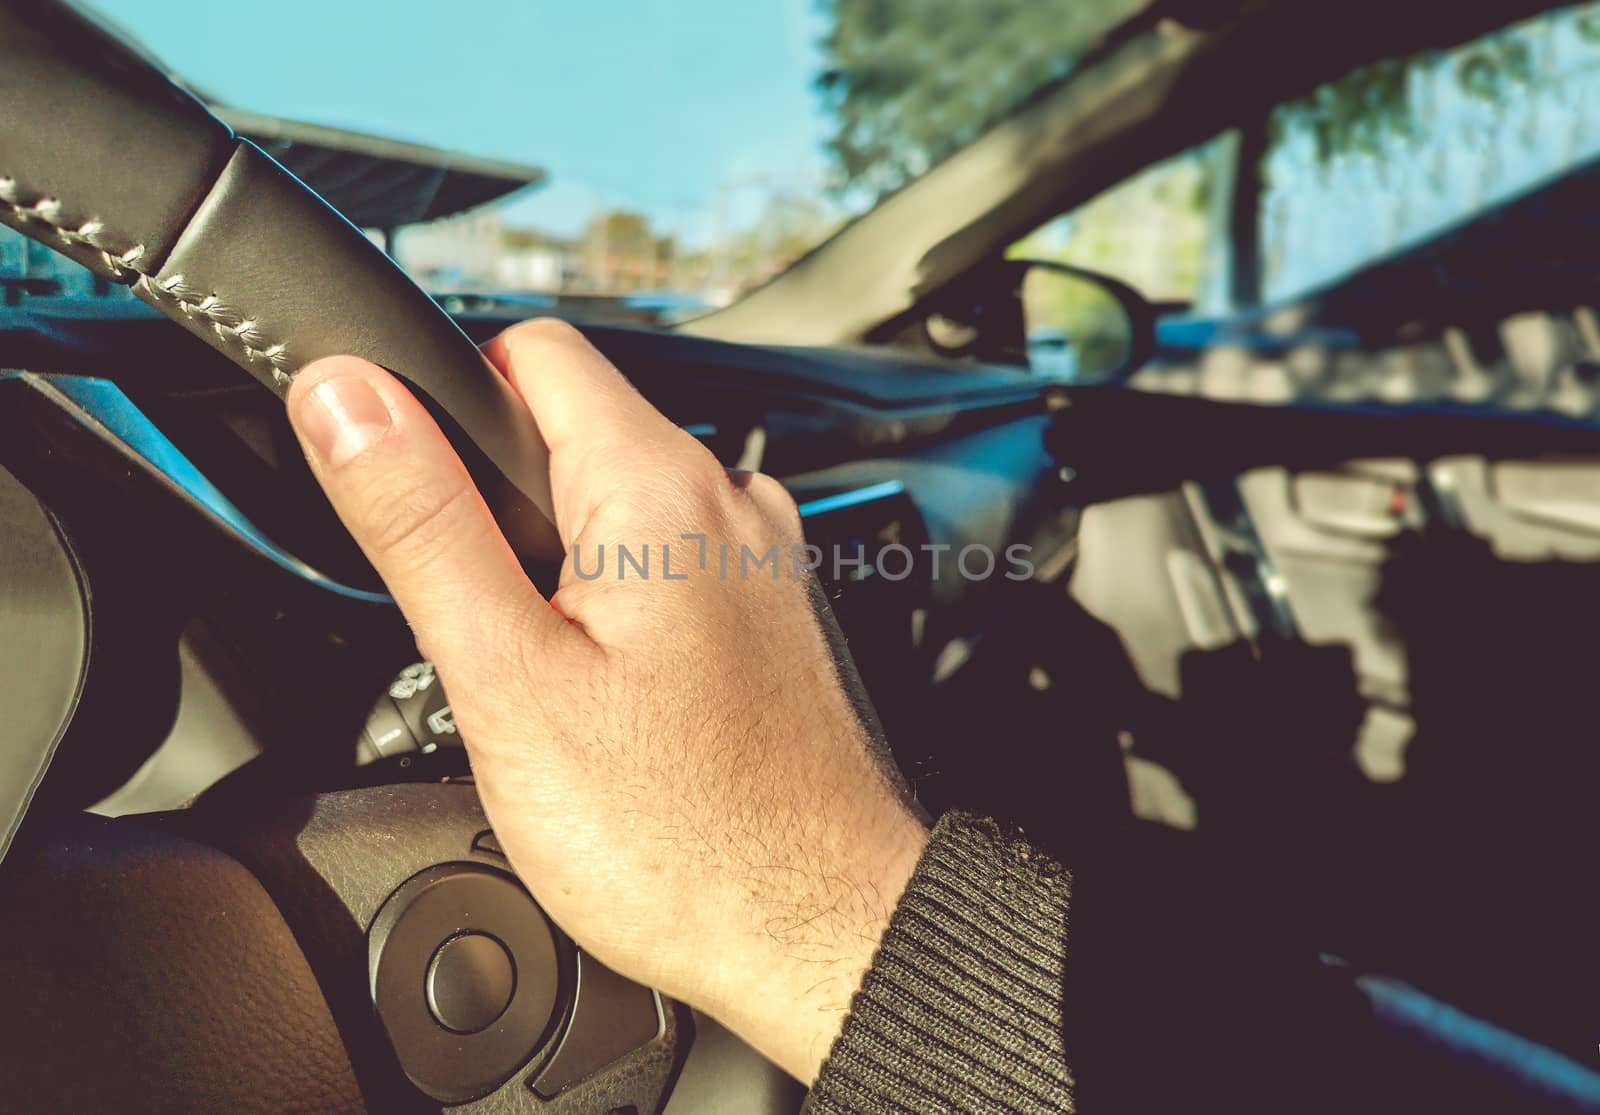 driving learning right hand on steering wheel inside a car with left-hand traffic morning light .